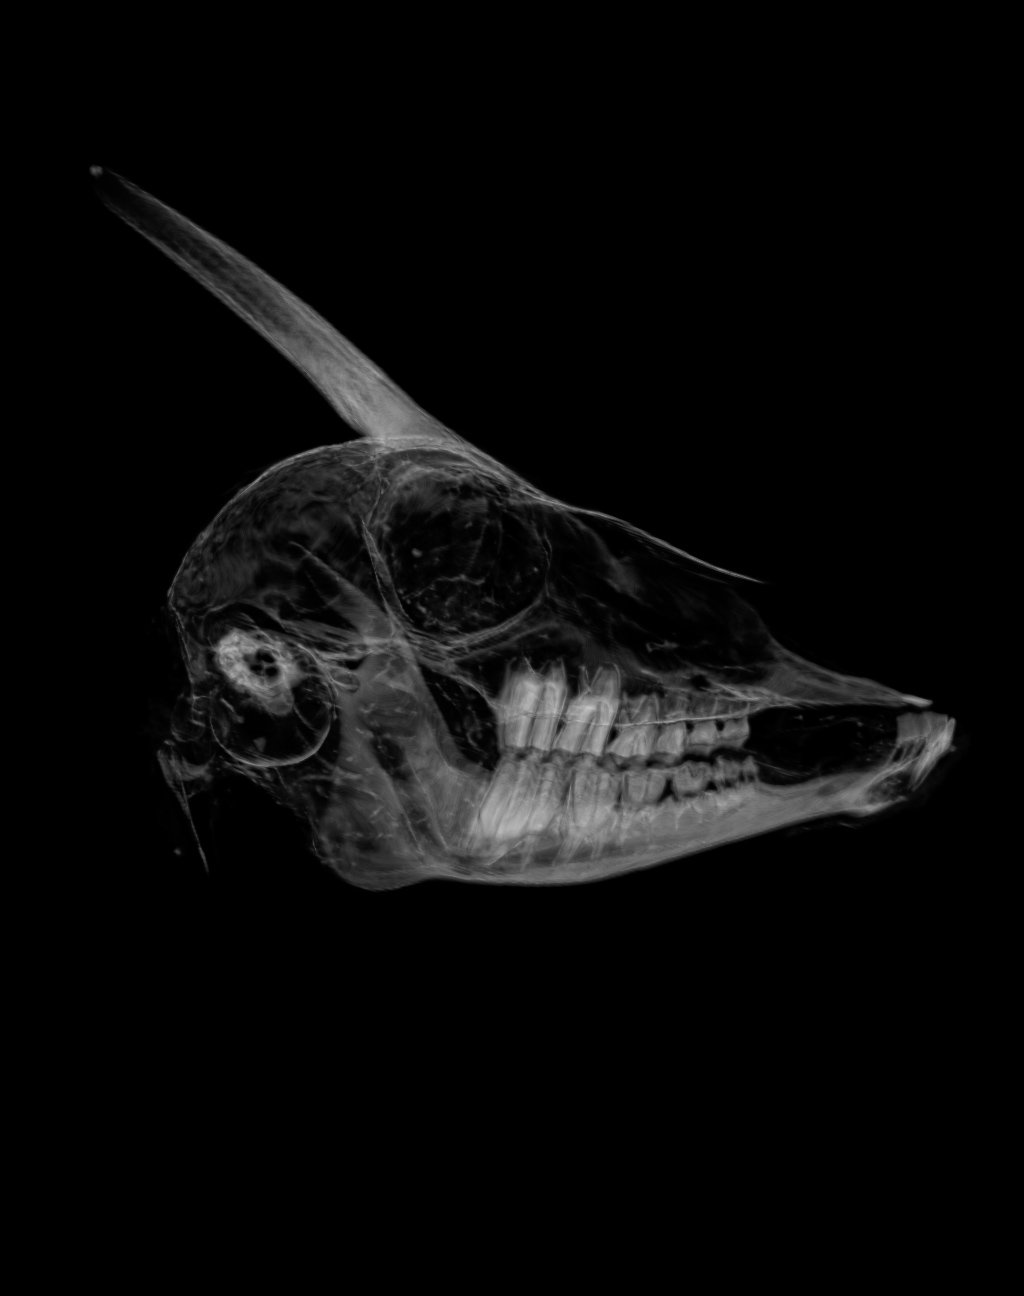 A maximum intensity projection taken from the CT scan allows us to see detail in the skull.  The images of the skull allowed the animal to be identified as an early adult of the North-African sub-group of Gazella dorcas.